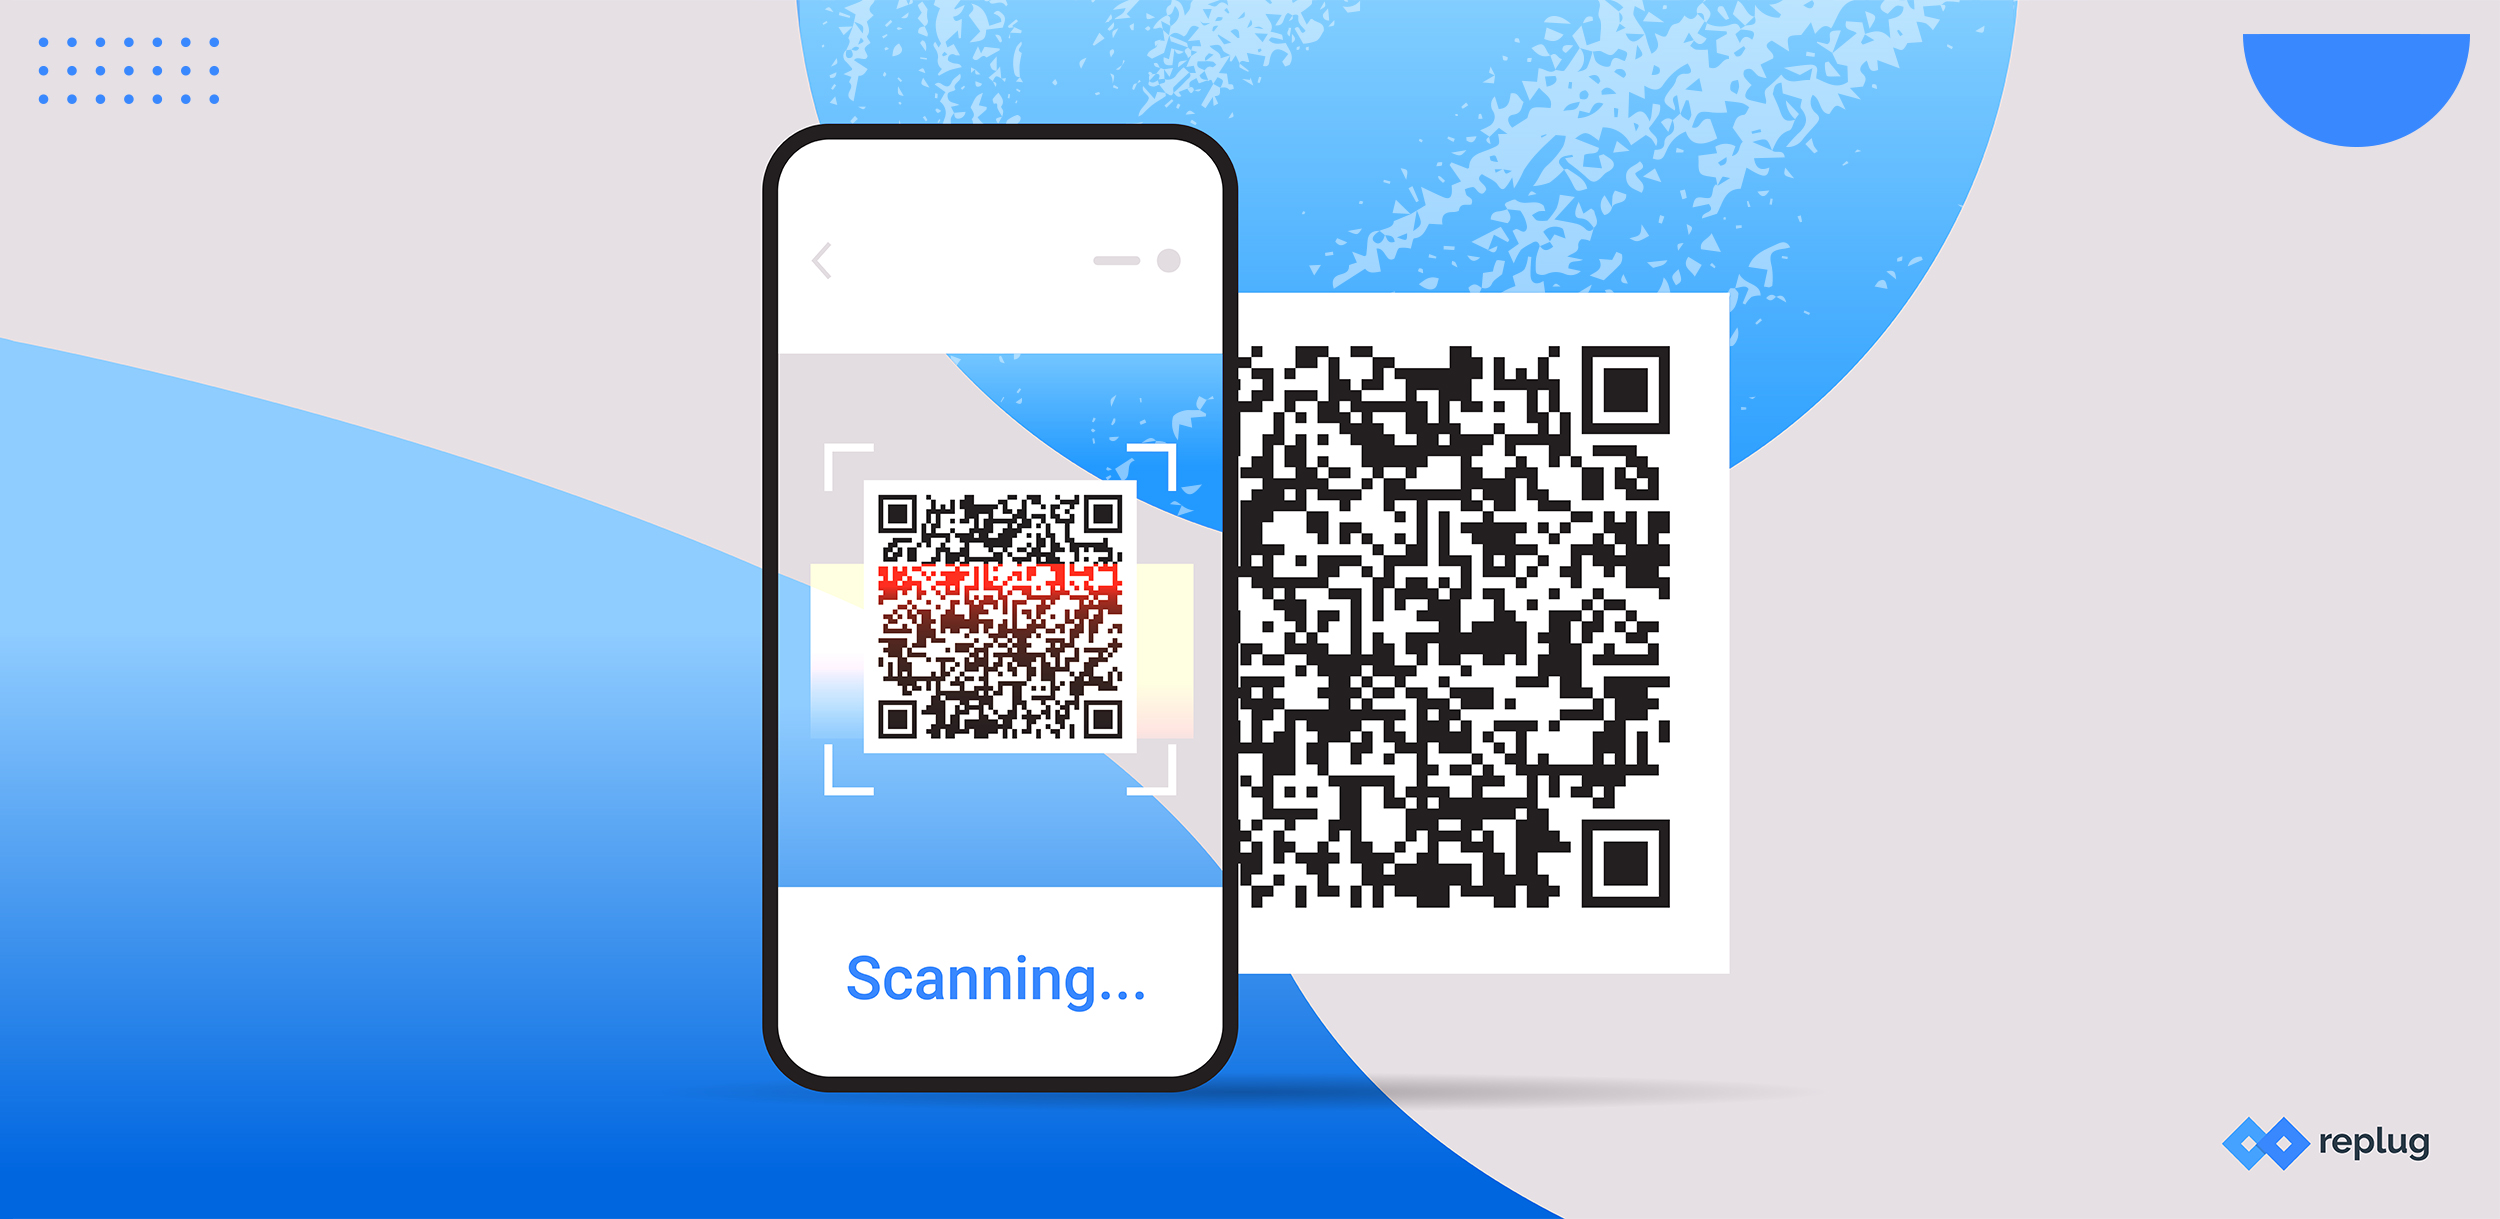 A complete Guide to use QR Code Marketing